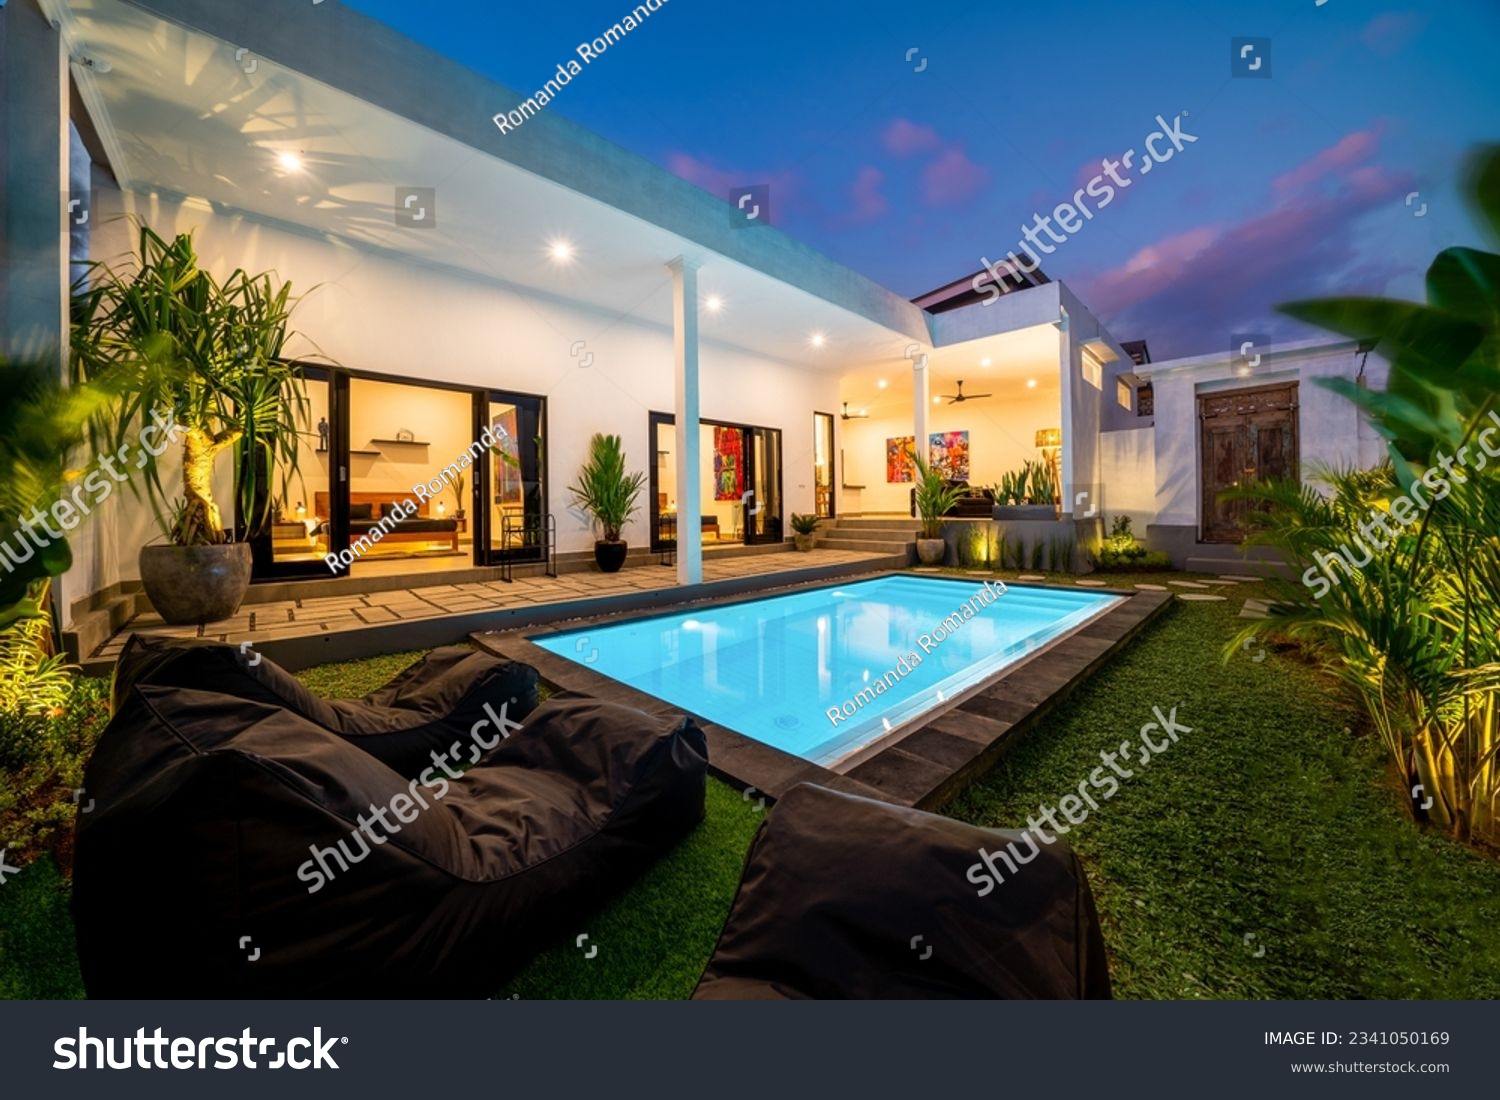 Tropical villa view with garden, swimming pool and open living room at sunset. #2341050169